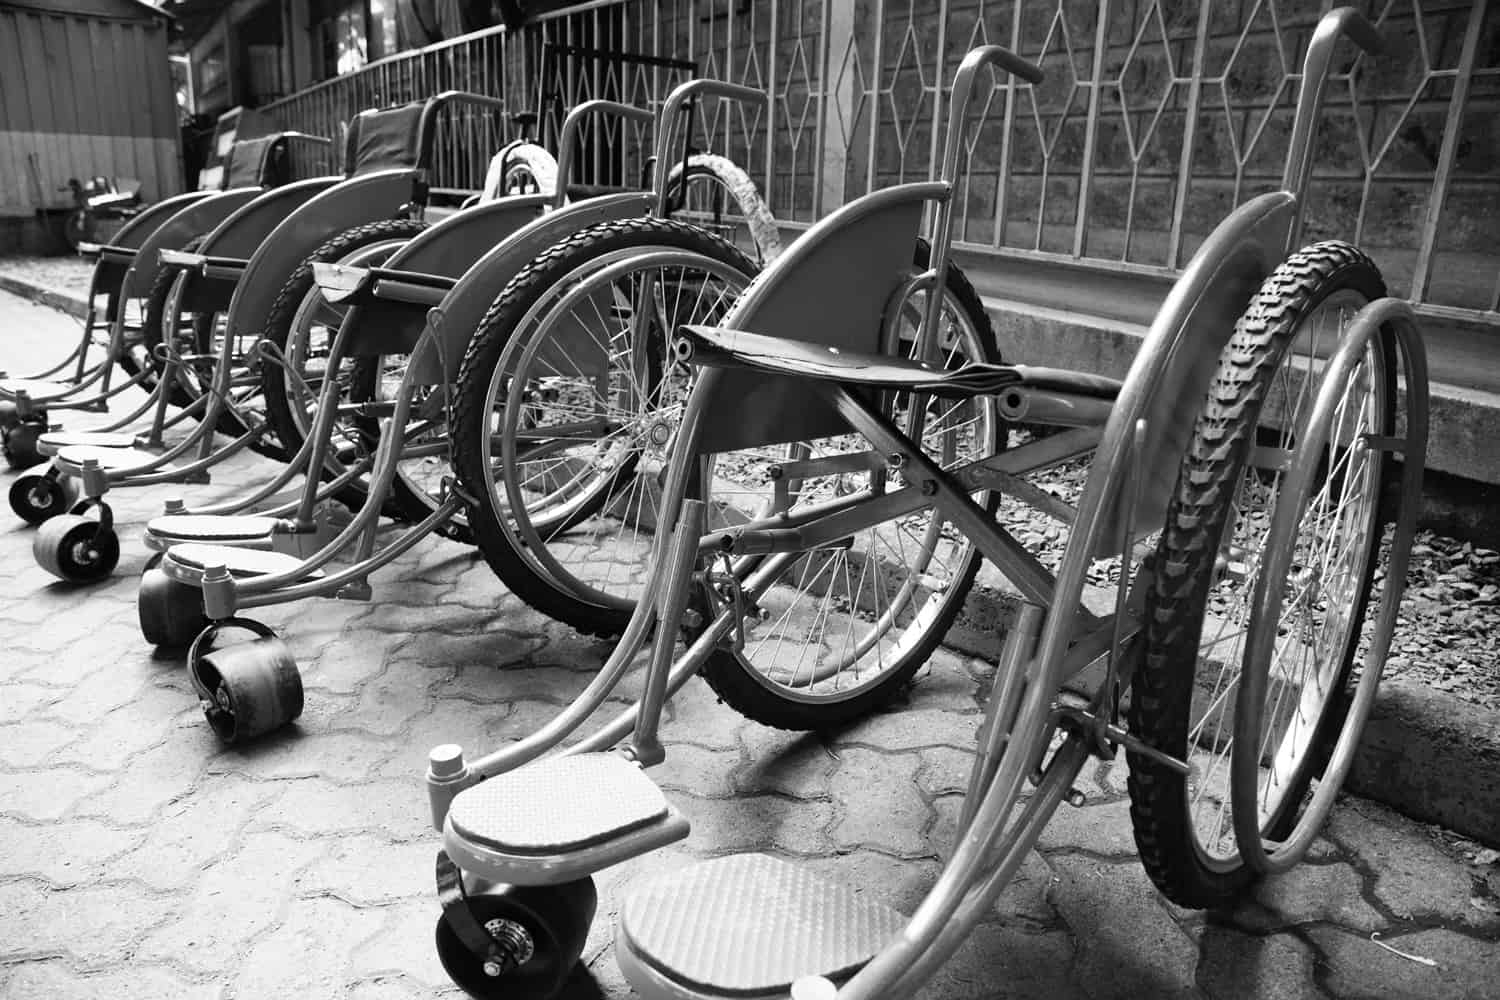 image of a row of wheel chairs.